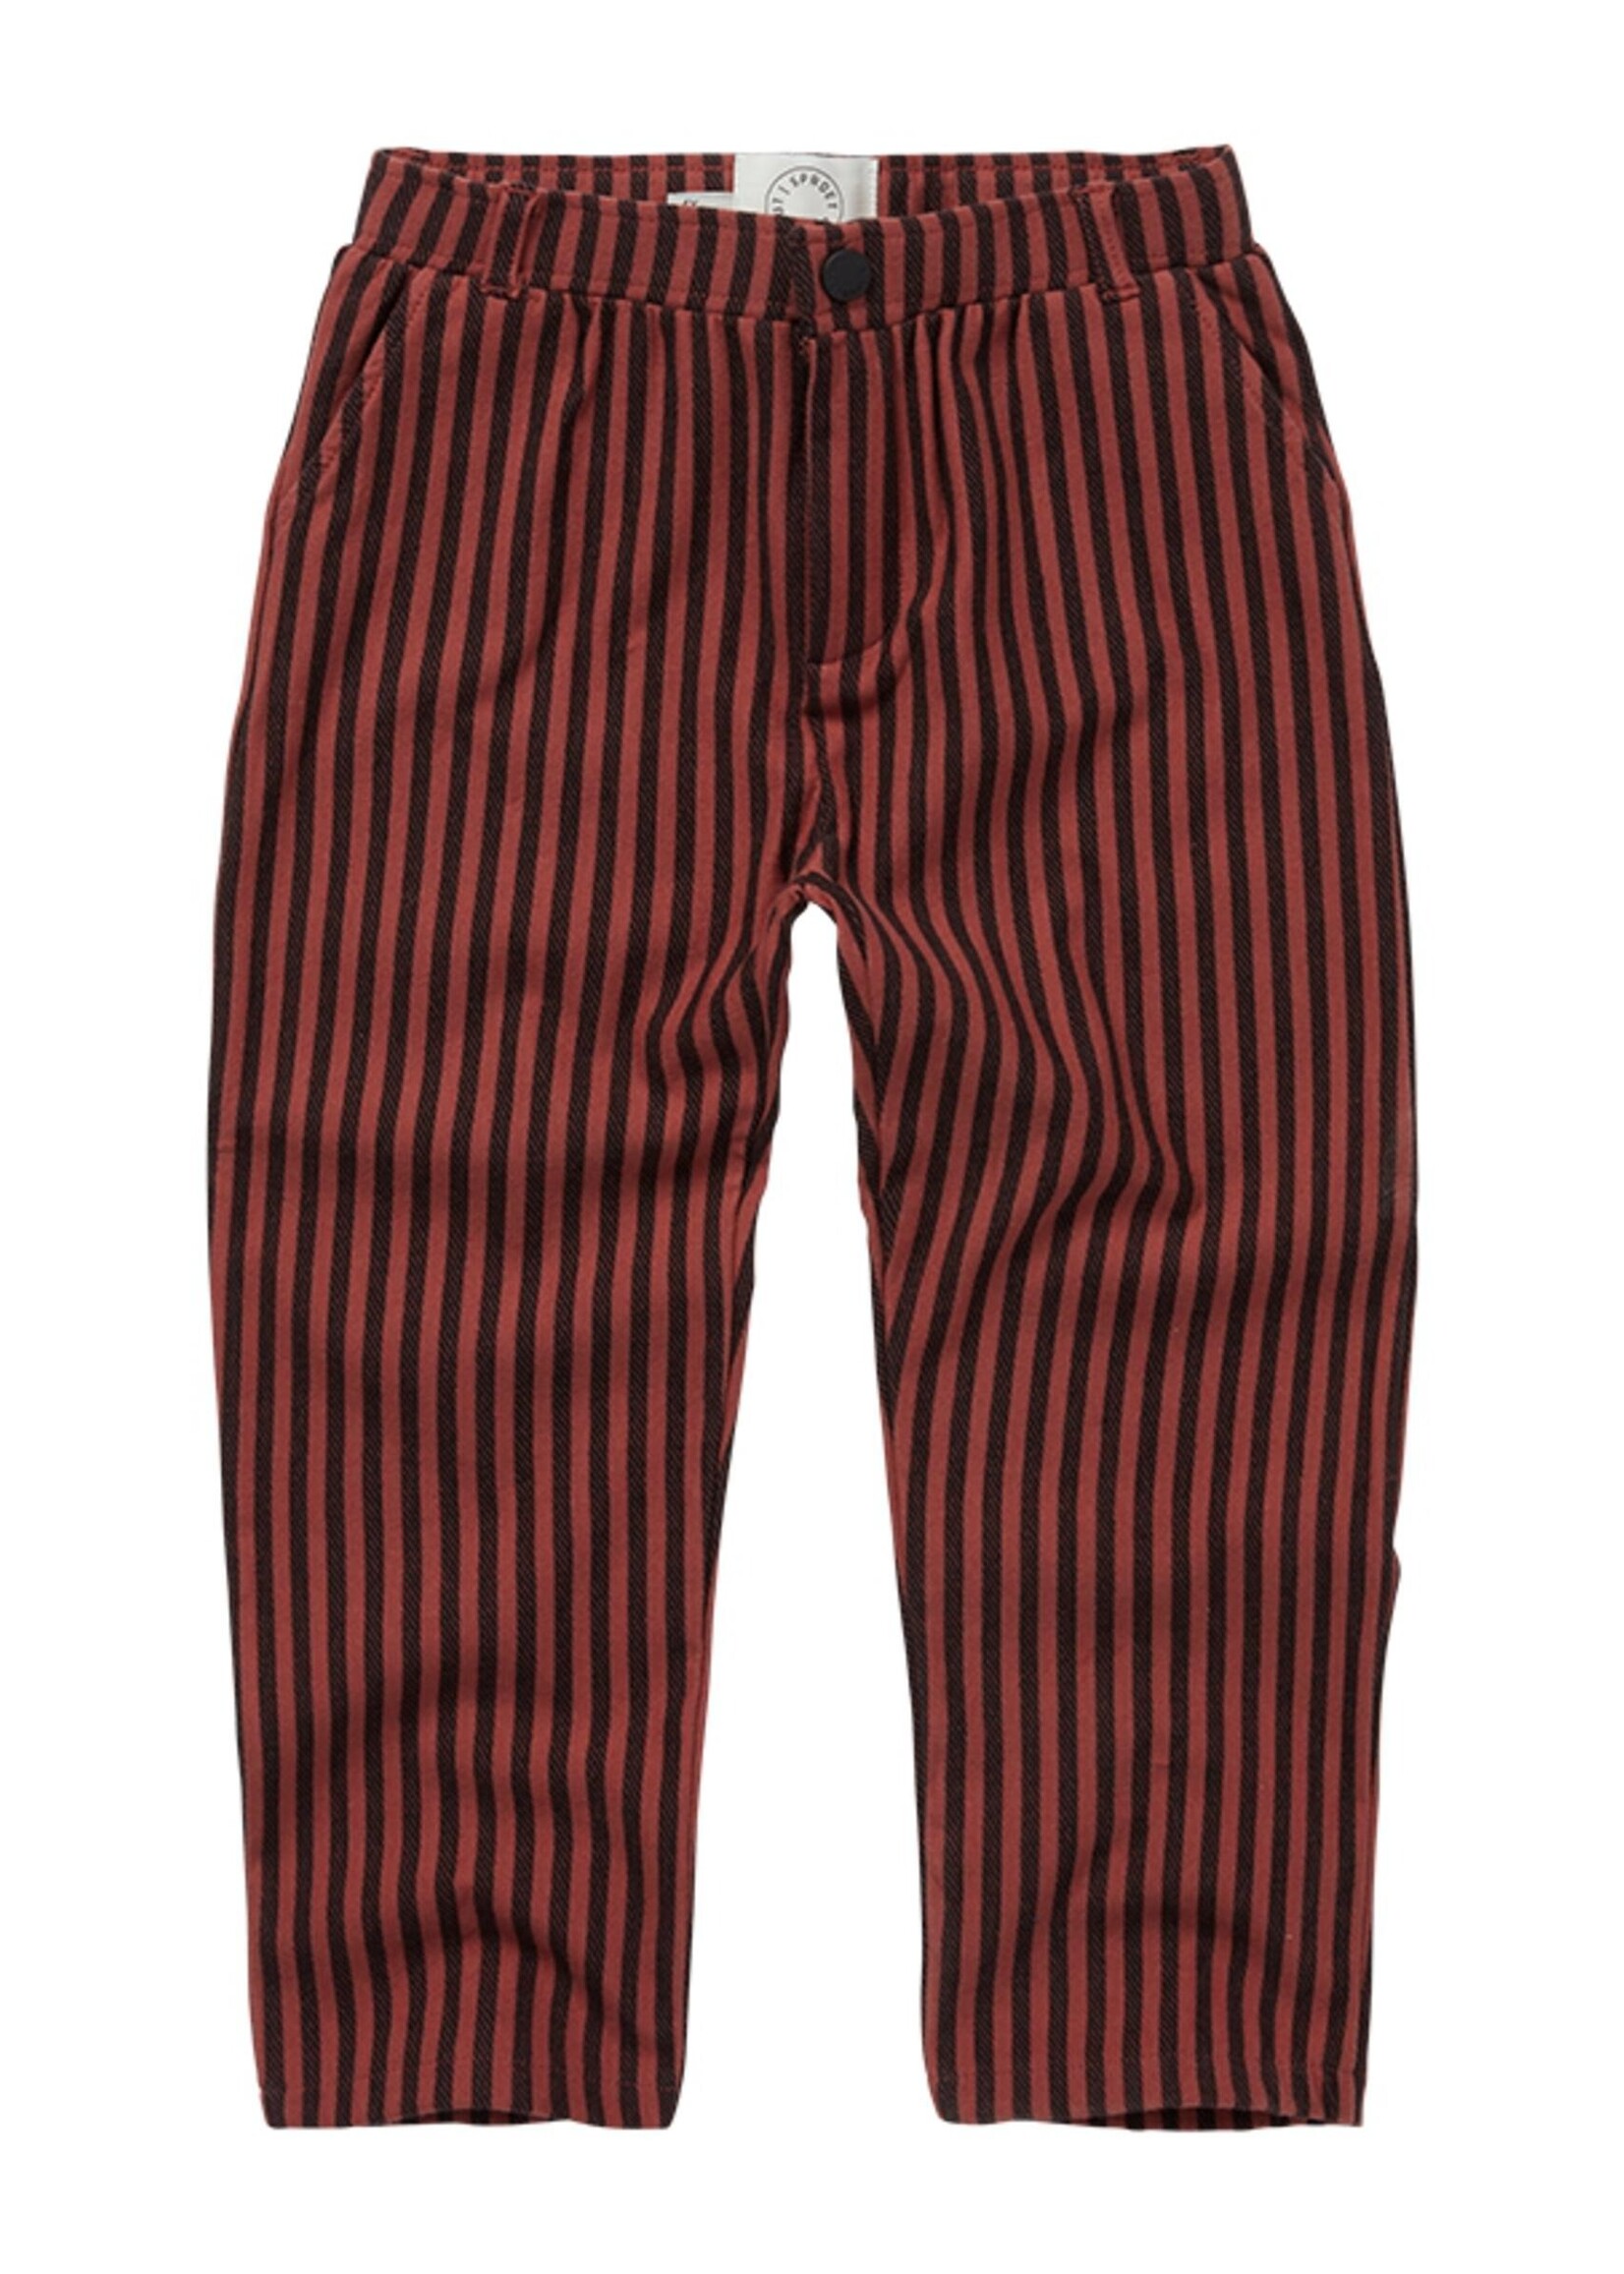 Sproet & Sprout Stripe chino, Barn red